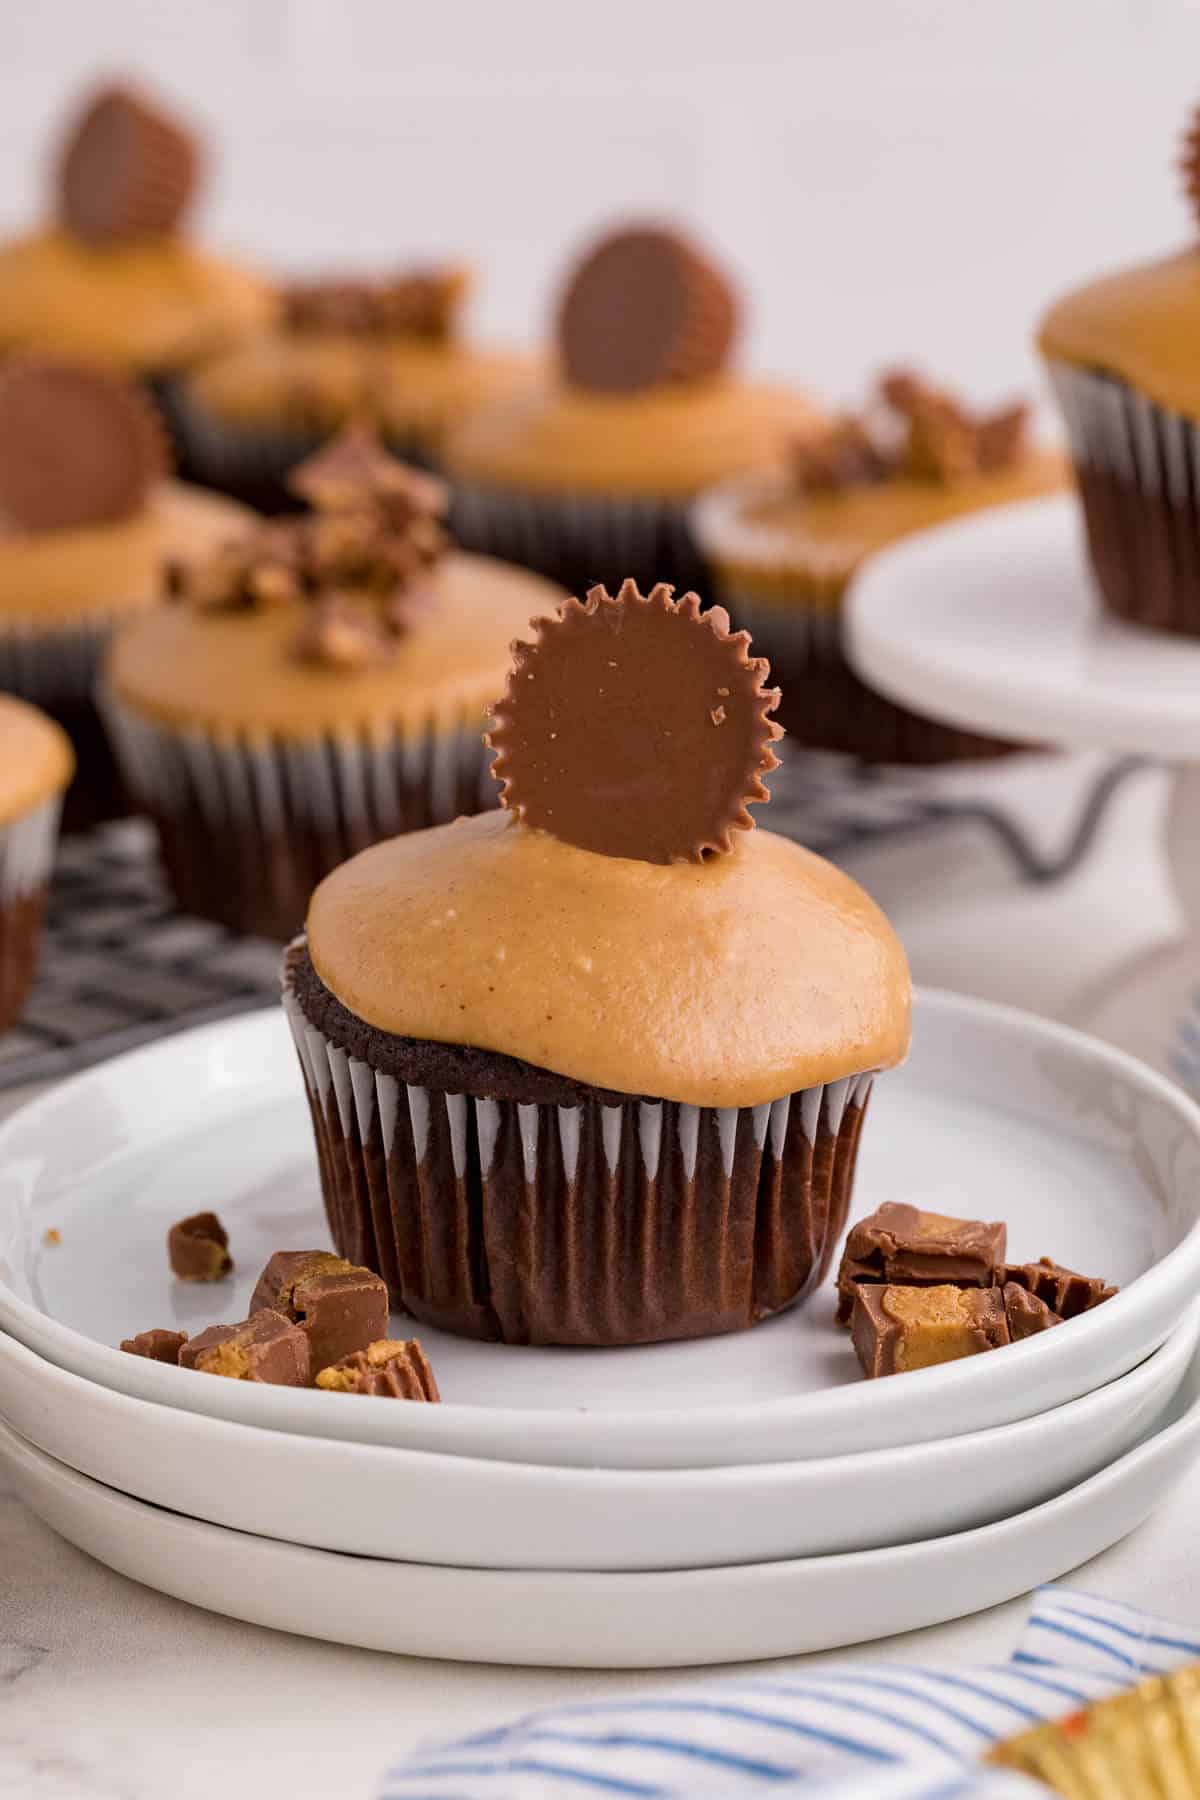 A Reese's Cupcake on a white plate.